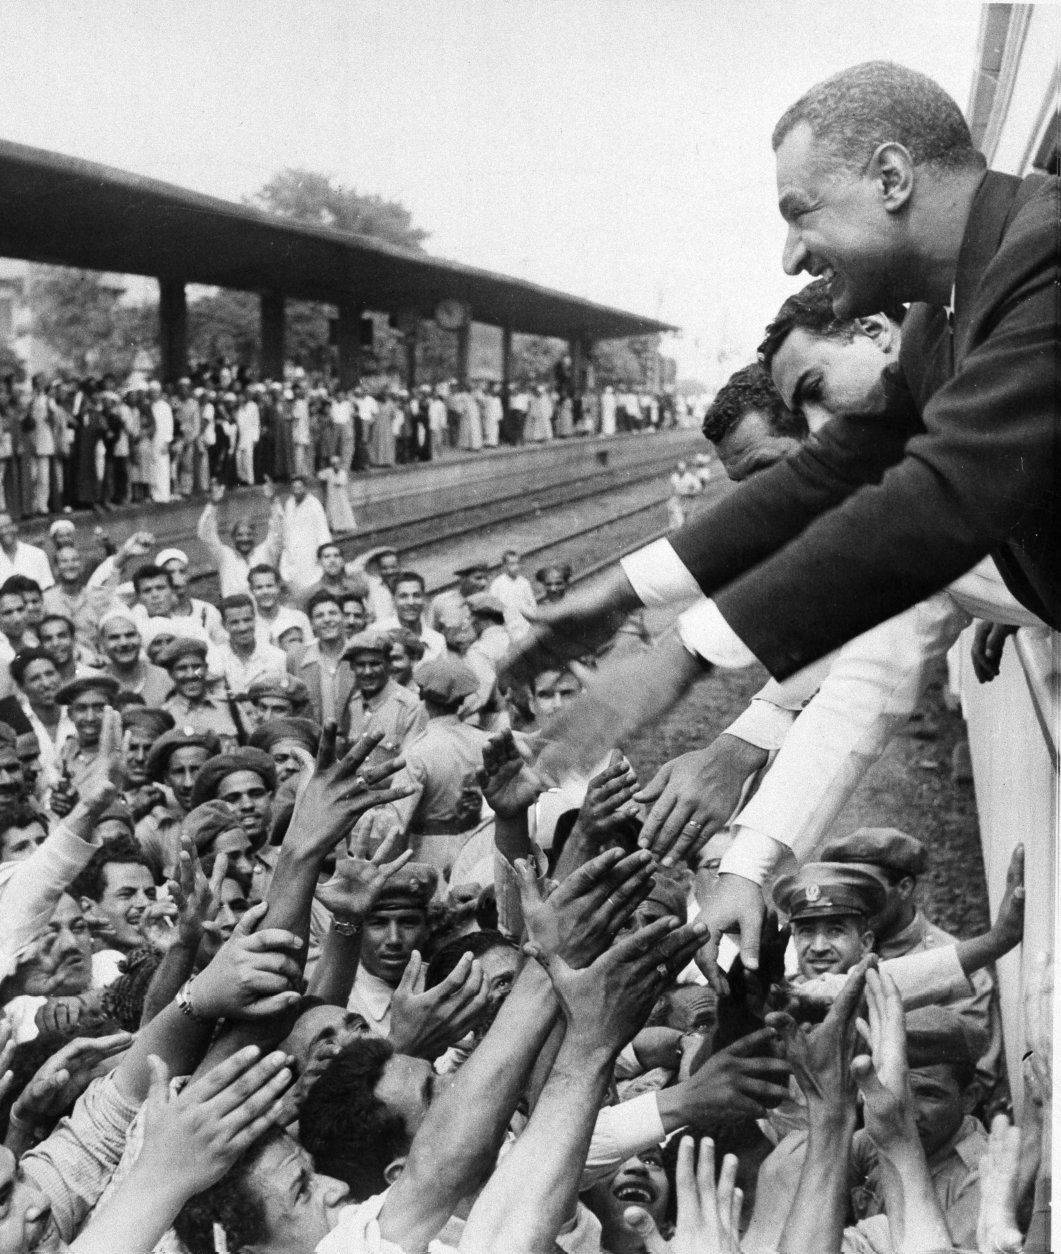 Egypt's President Gamal Abdel Nasser stretches his arms to greet fellow Egyptians during a stop at one of the stations en route from Alexandria to Cairo, July 28, 1956. Earlier Nasser shouted an angry reply to British and French protests against his nationalization of the all-important Suez Canal. he was welcomed by cheering crowds which greeted him on his return to the capital, where he announced the taking-over of the canal the night of July 27.  (AP Photo)